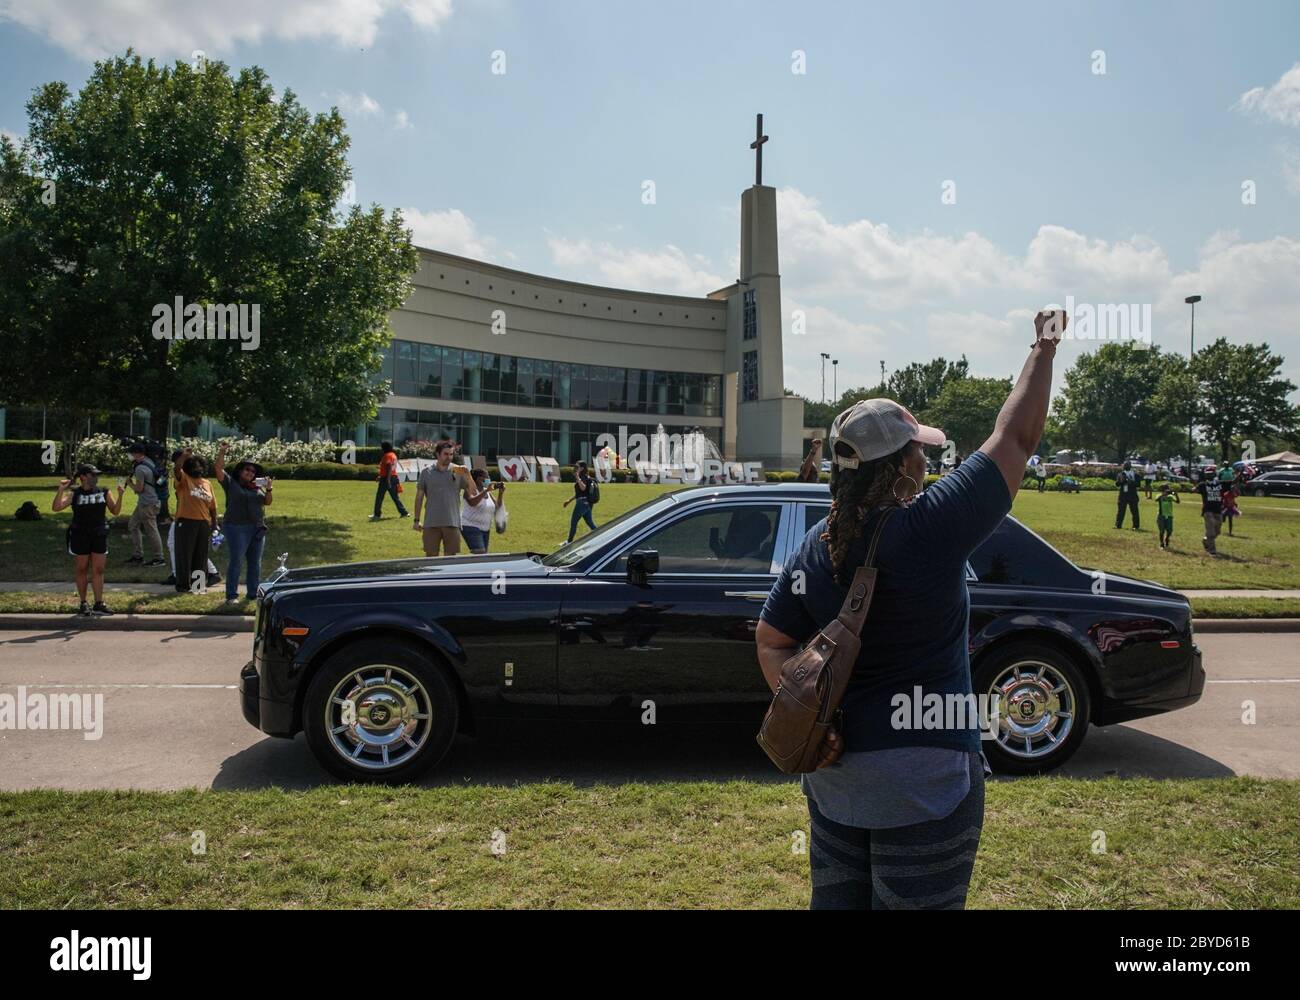 Houston, United States. 09th June, 2020. A woman raises her fist in salute as the funeral procession carrying the body of George Floyd to Houston Memorial Gardens passes the Fountain of Praise church in Houston, Texas on Tuesday, June 9, 2020. George Floyd died in police custody in Minneapolis, Minnesota on May 25, 2020. His death sparked demonstrations globally to combat racism and legislation in Congress for reforms. Photo by Jemal Countess/UPI Credit: UPI/Alamy Live News Stock Photo